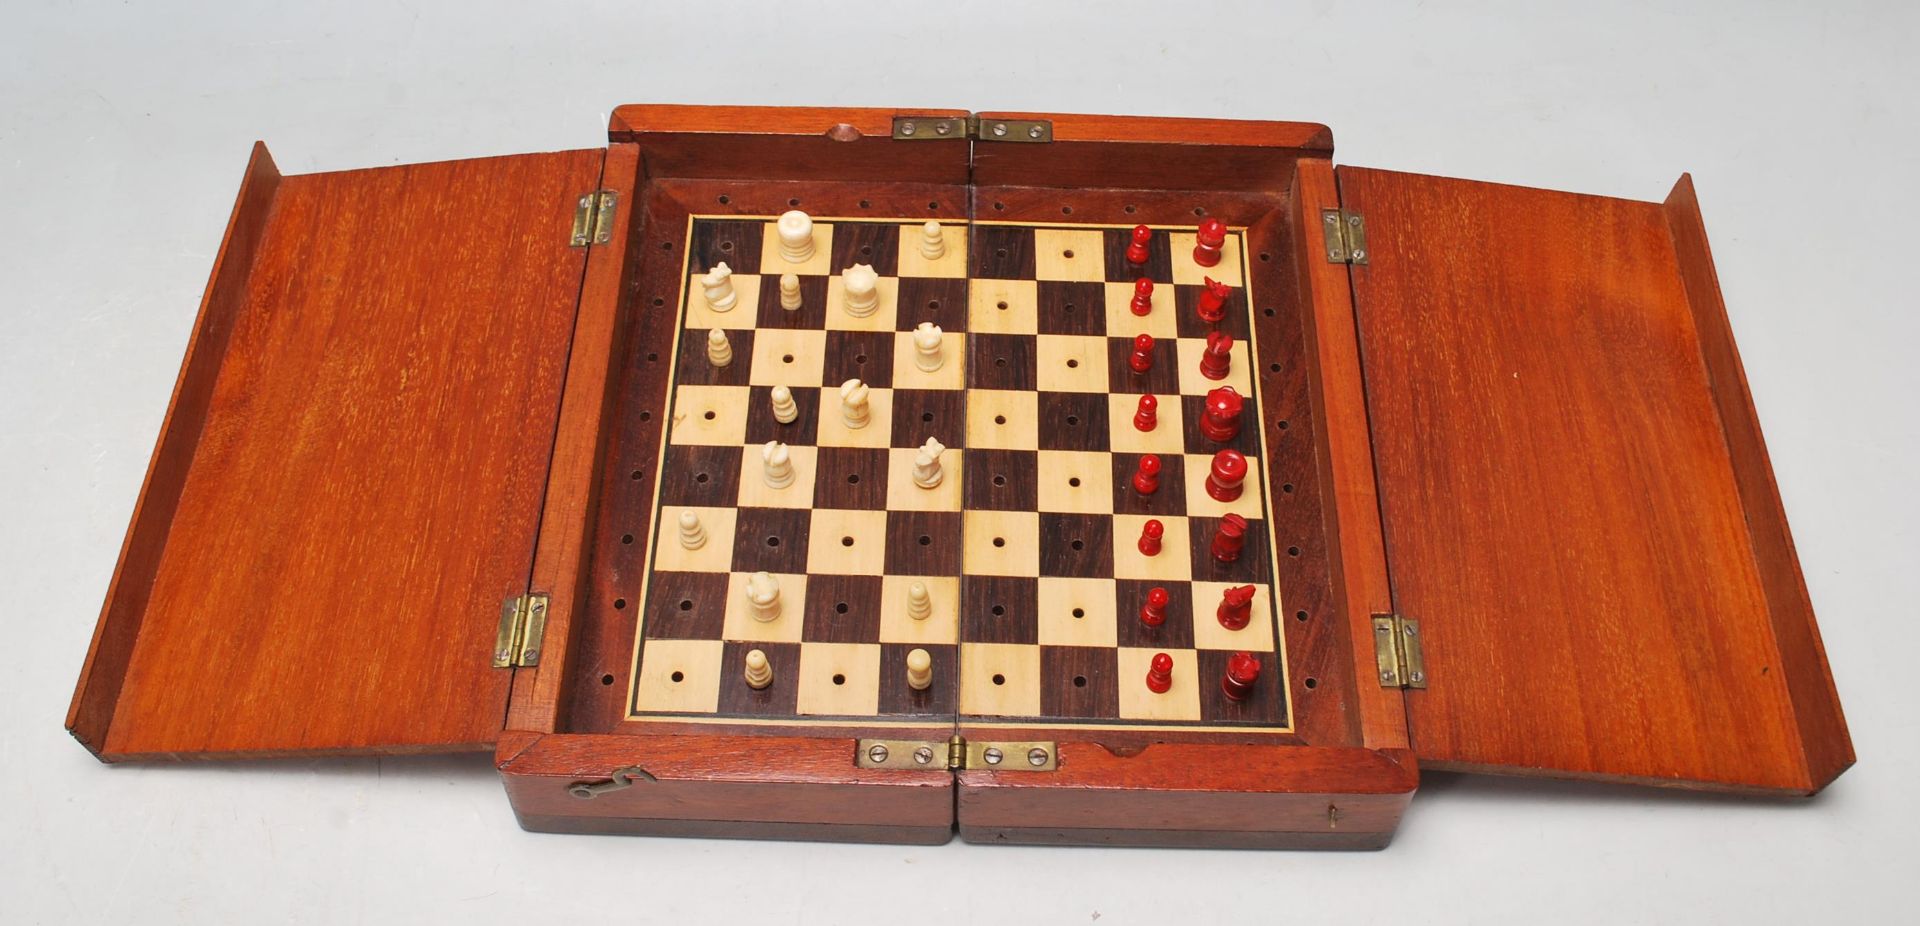 19TH CENTURY VICTORIAN TRAVELING CHESS SET IN THE MANNER OF JAQUES WHITTINGTON